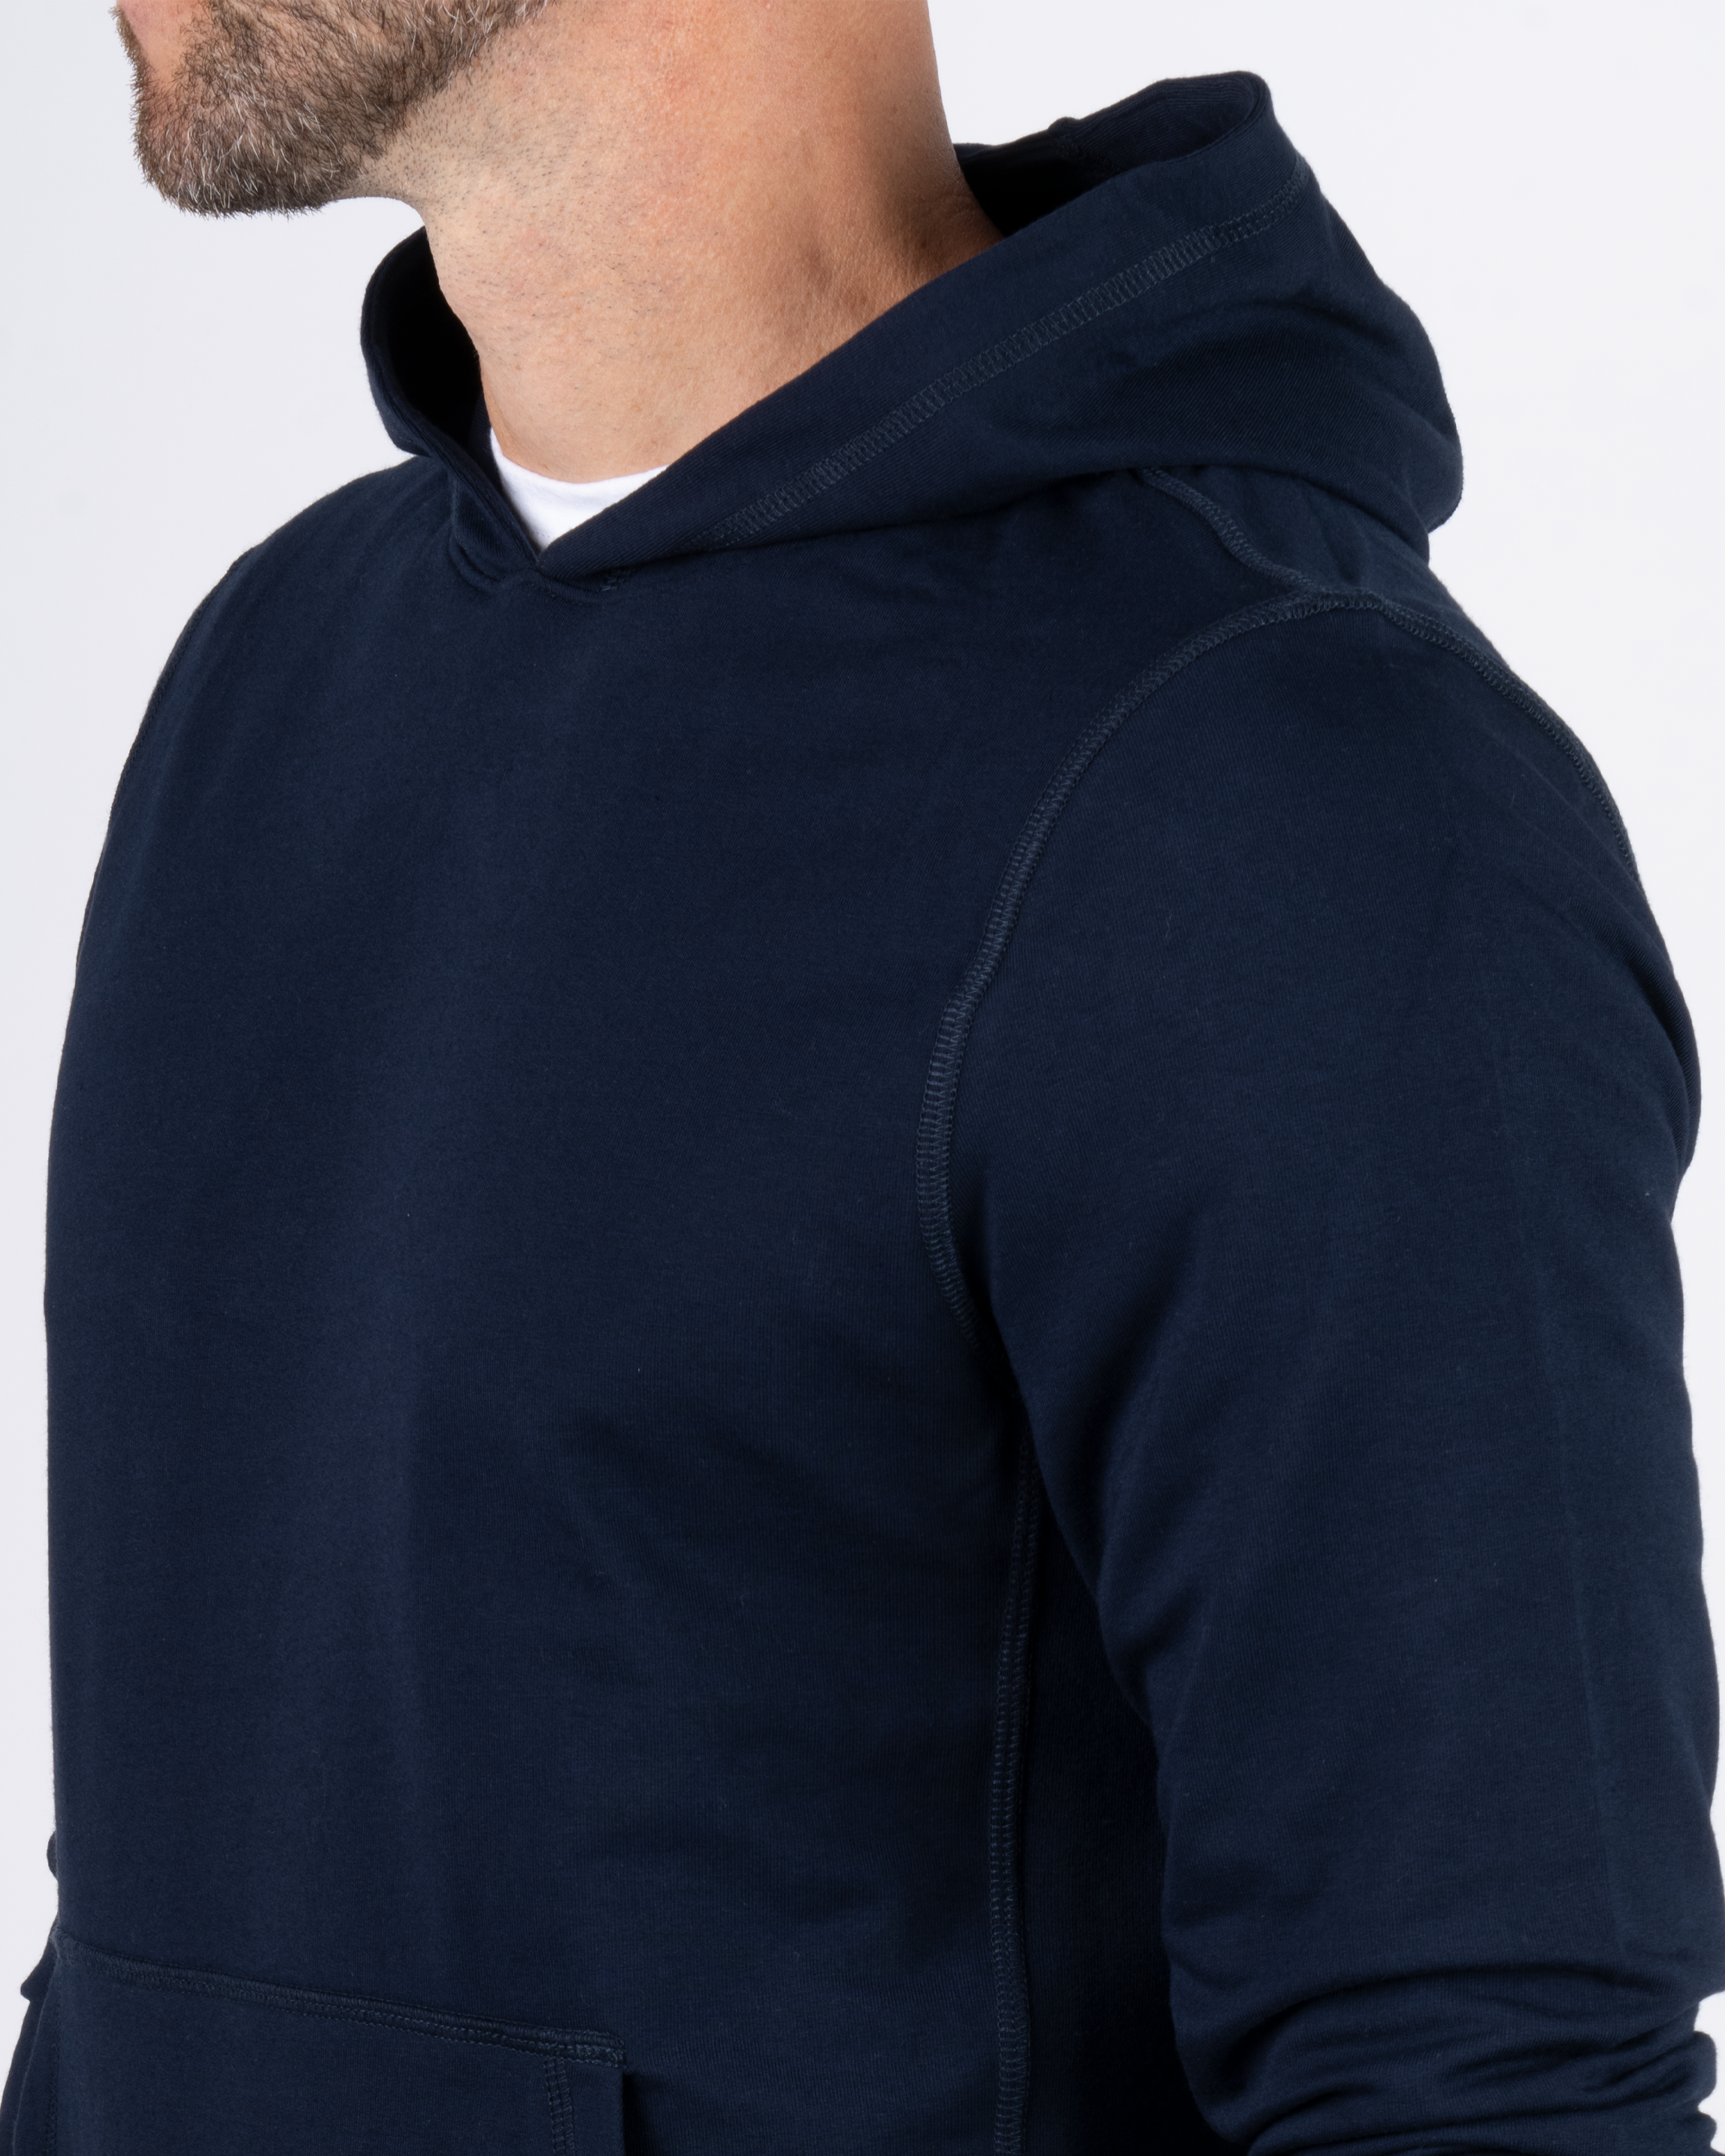 Foreign Rider Co Technical Fabric Navy Hoodie Shoulder Detail